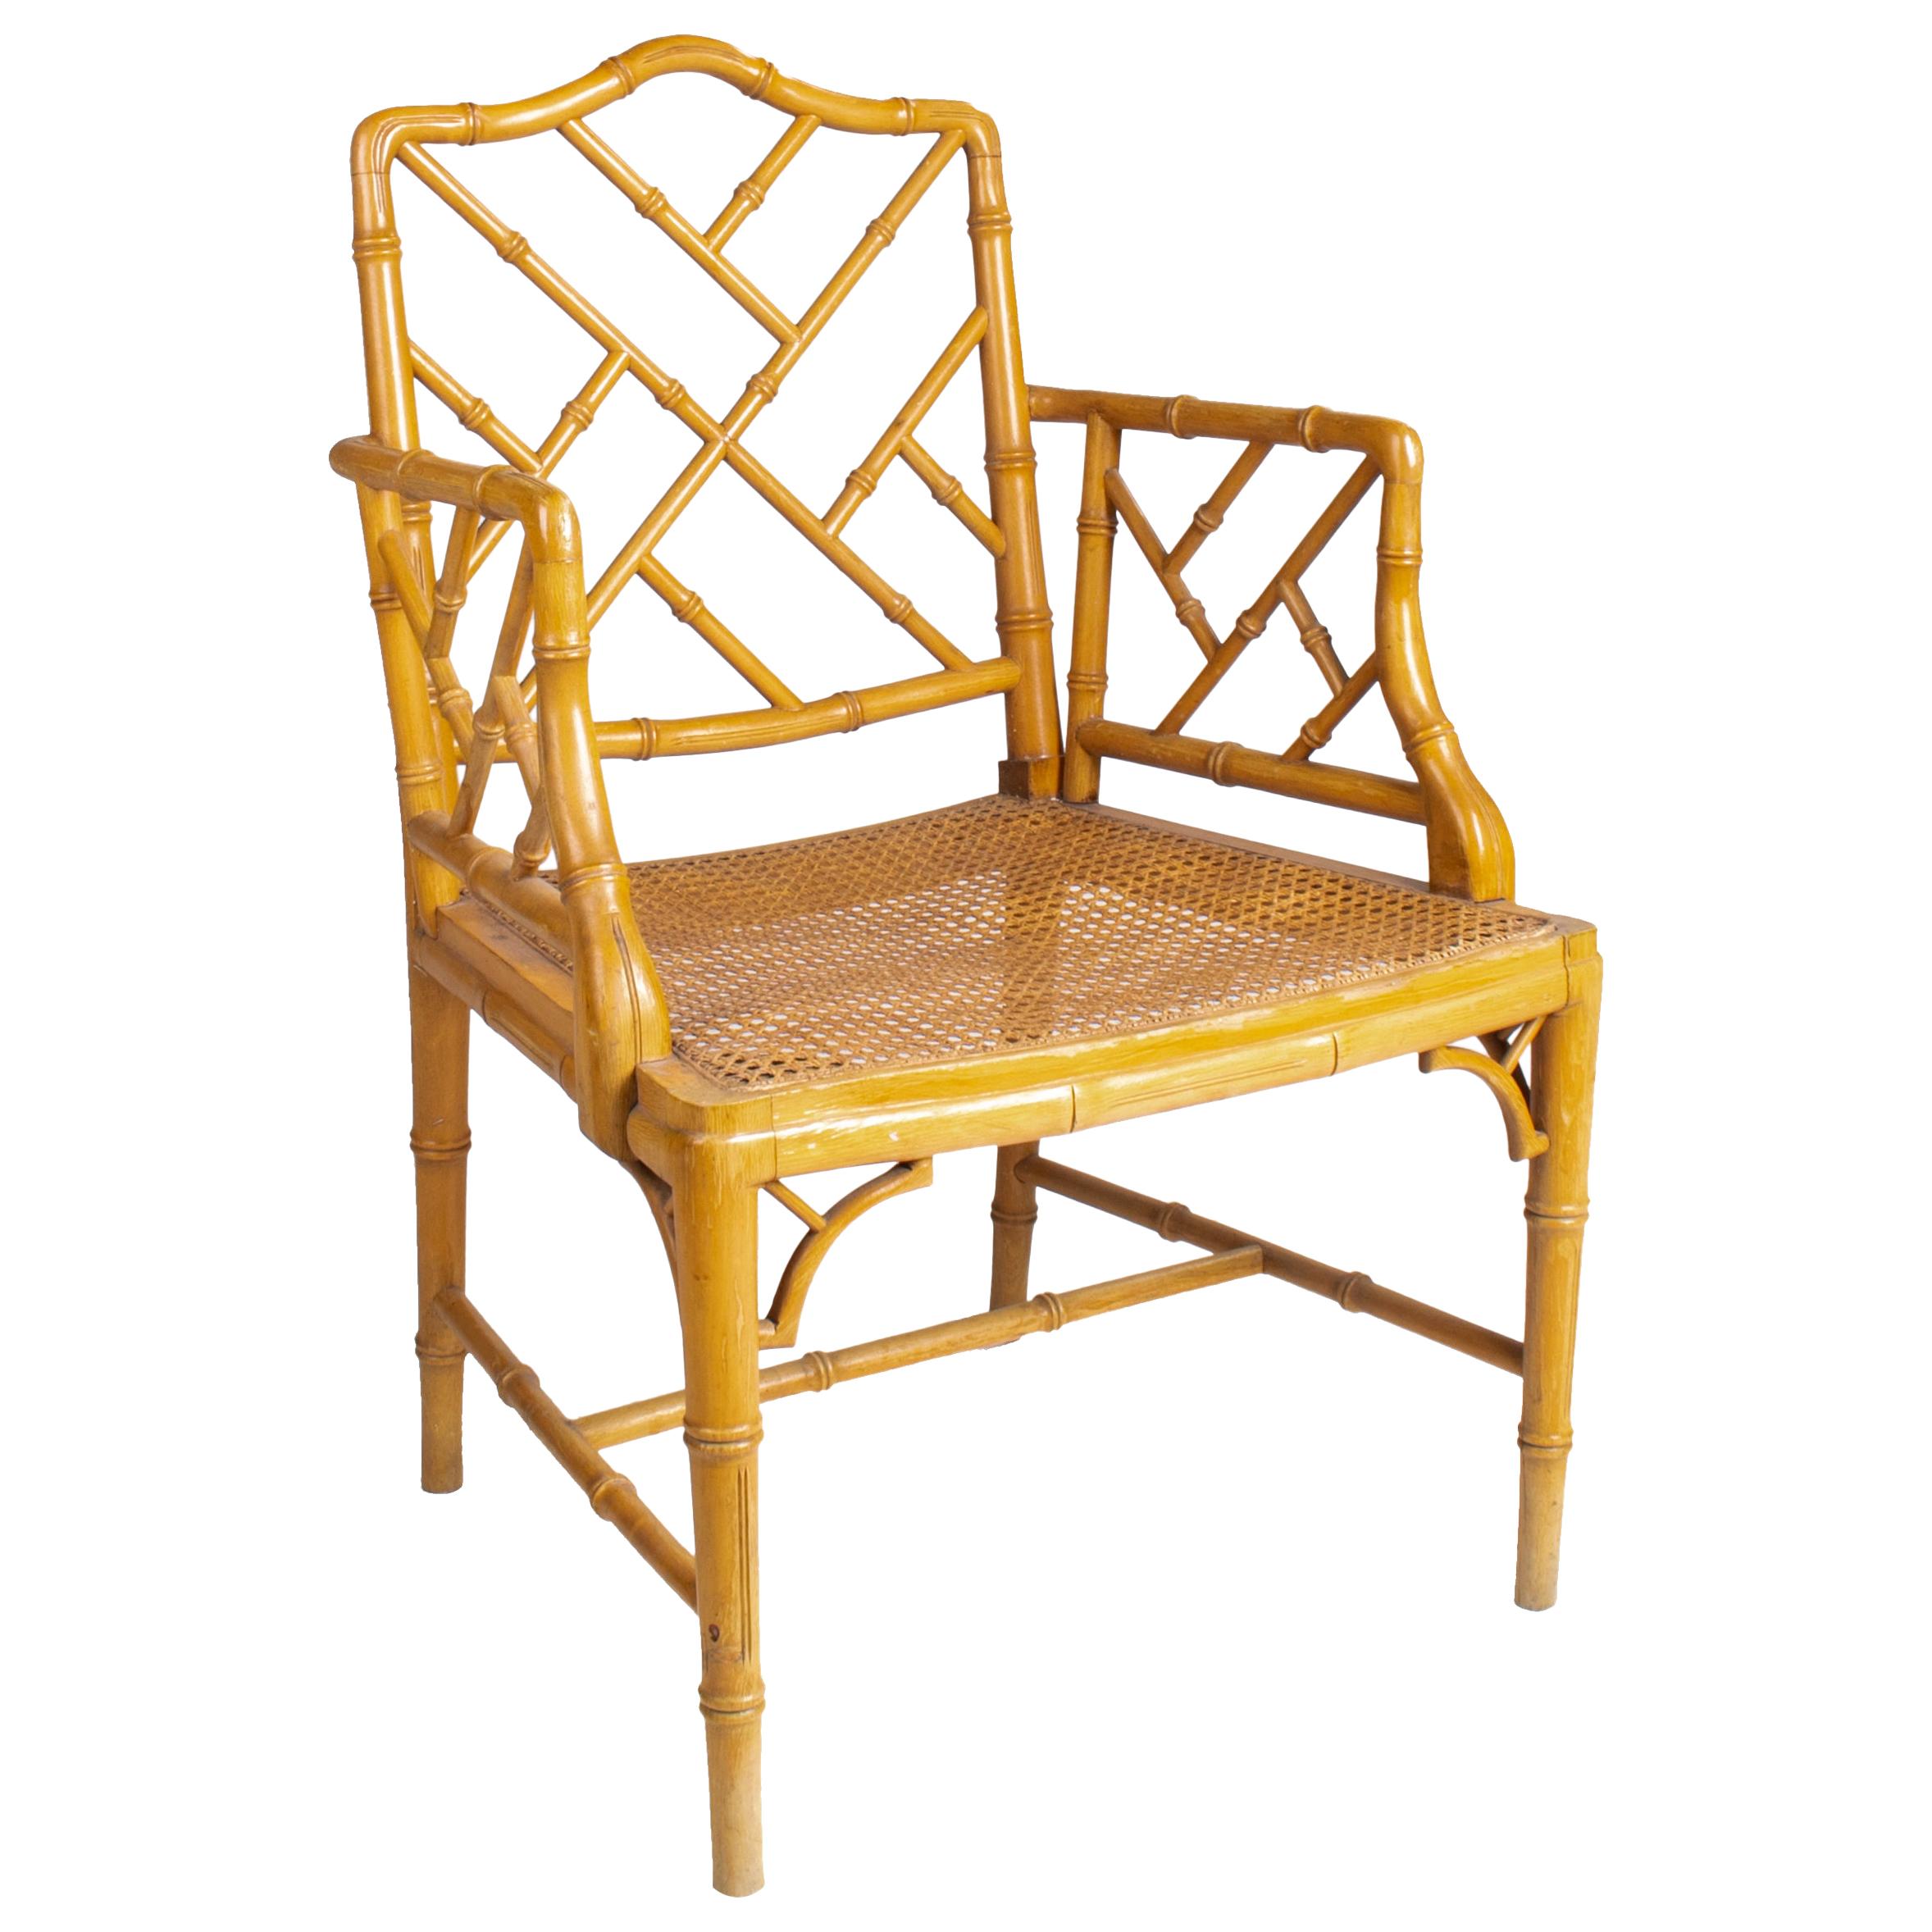 1970s Spanish Wooden Armchair Imitating Bamboo with Woven Wicker Seat